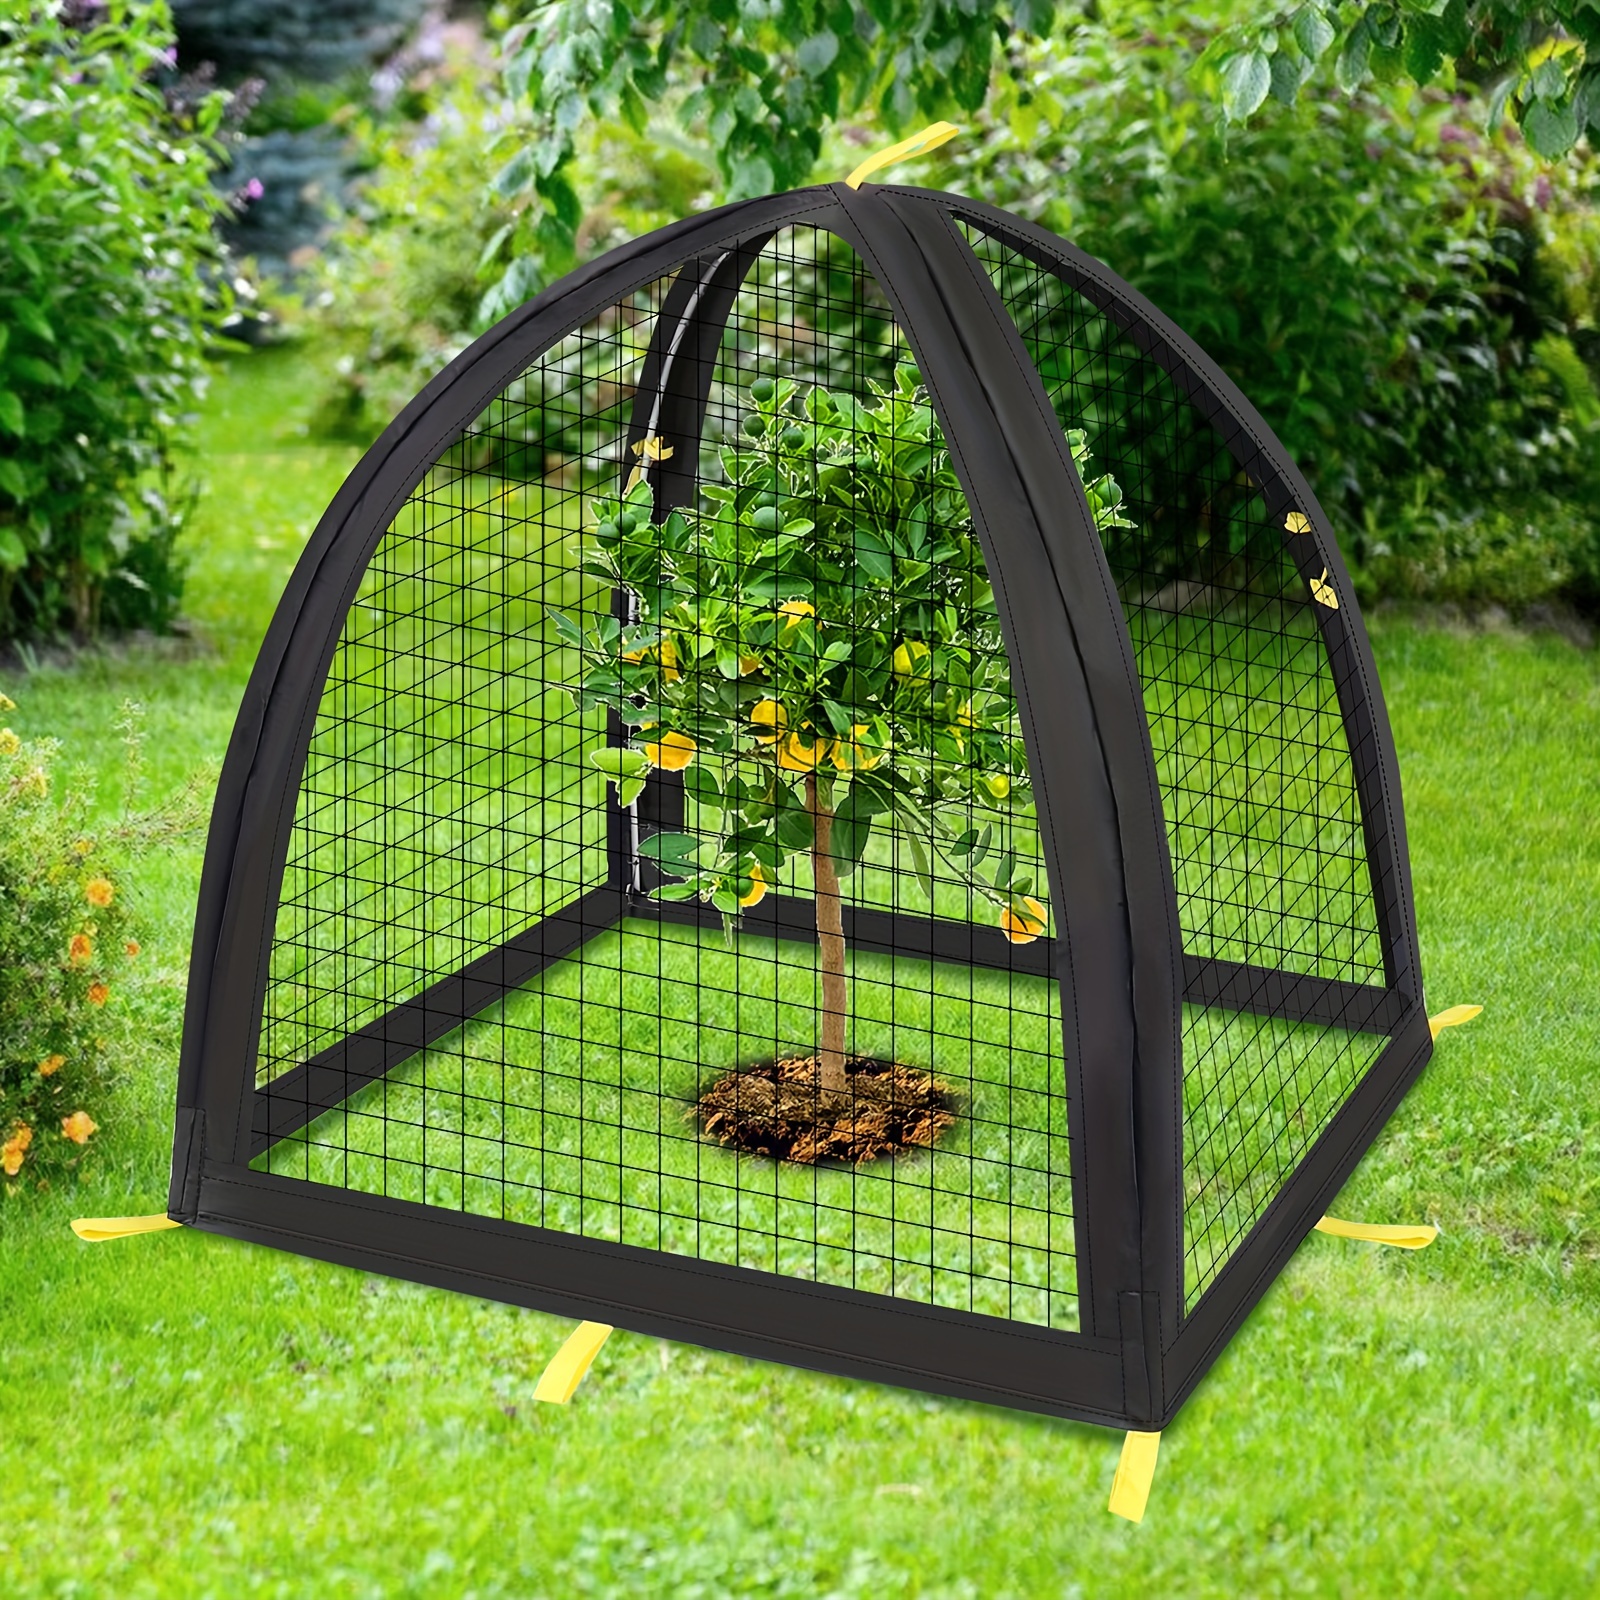 

Protective Plant Cage: Black Metal Fiber Netting For Garden Plants - Keeps Out Birds, Rabbits, And Other Pests